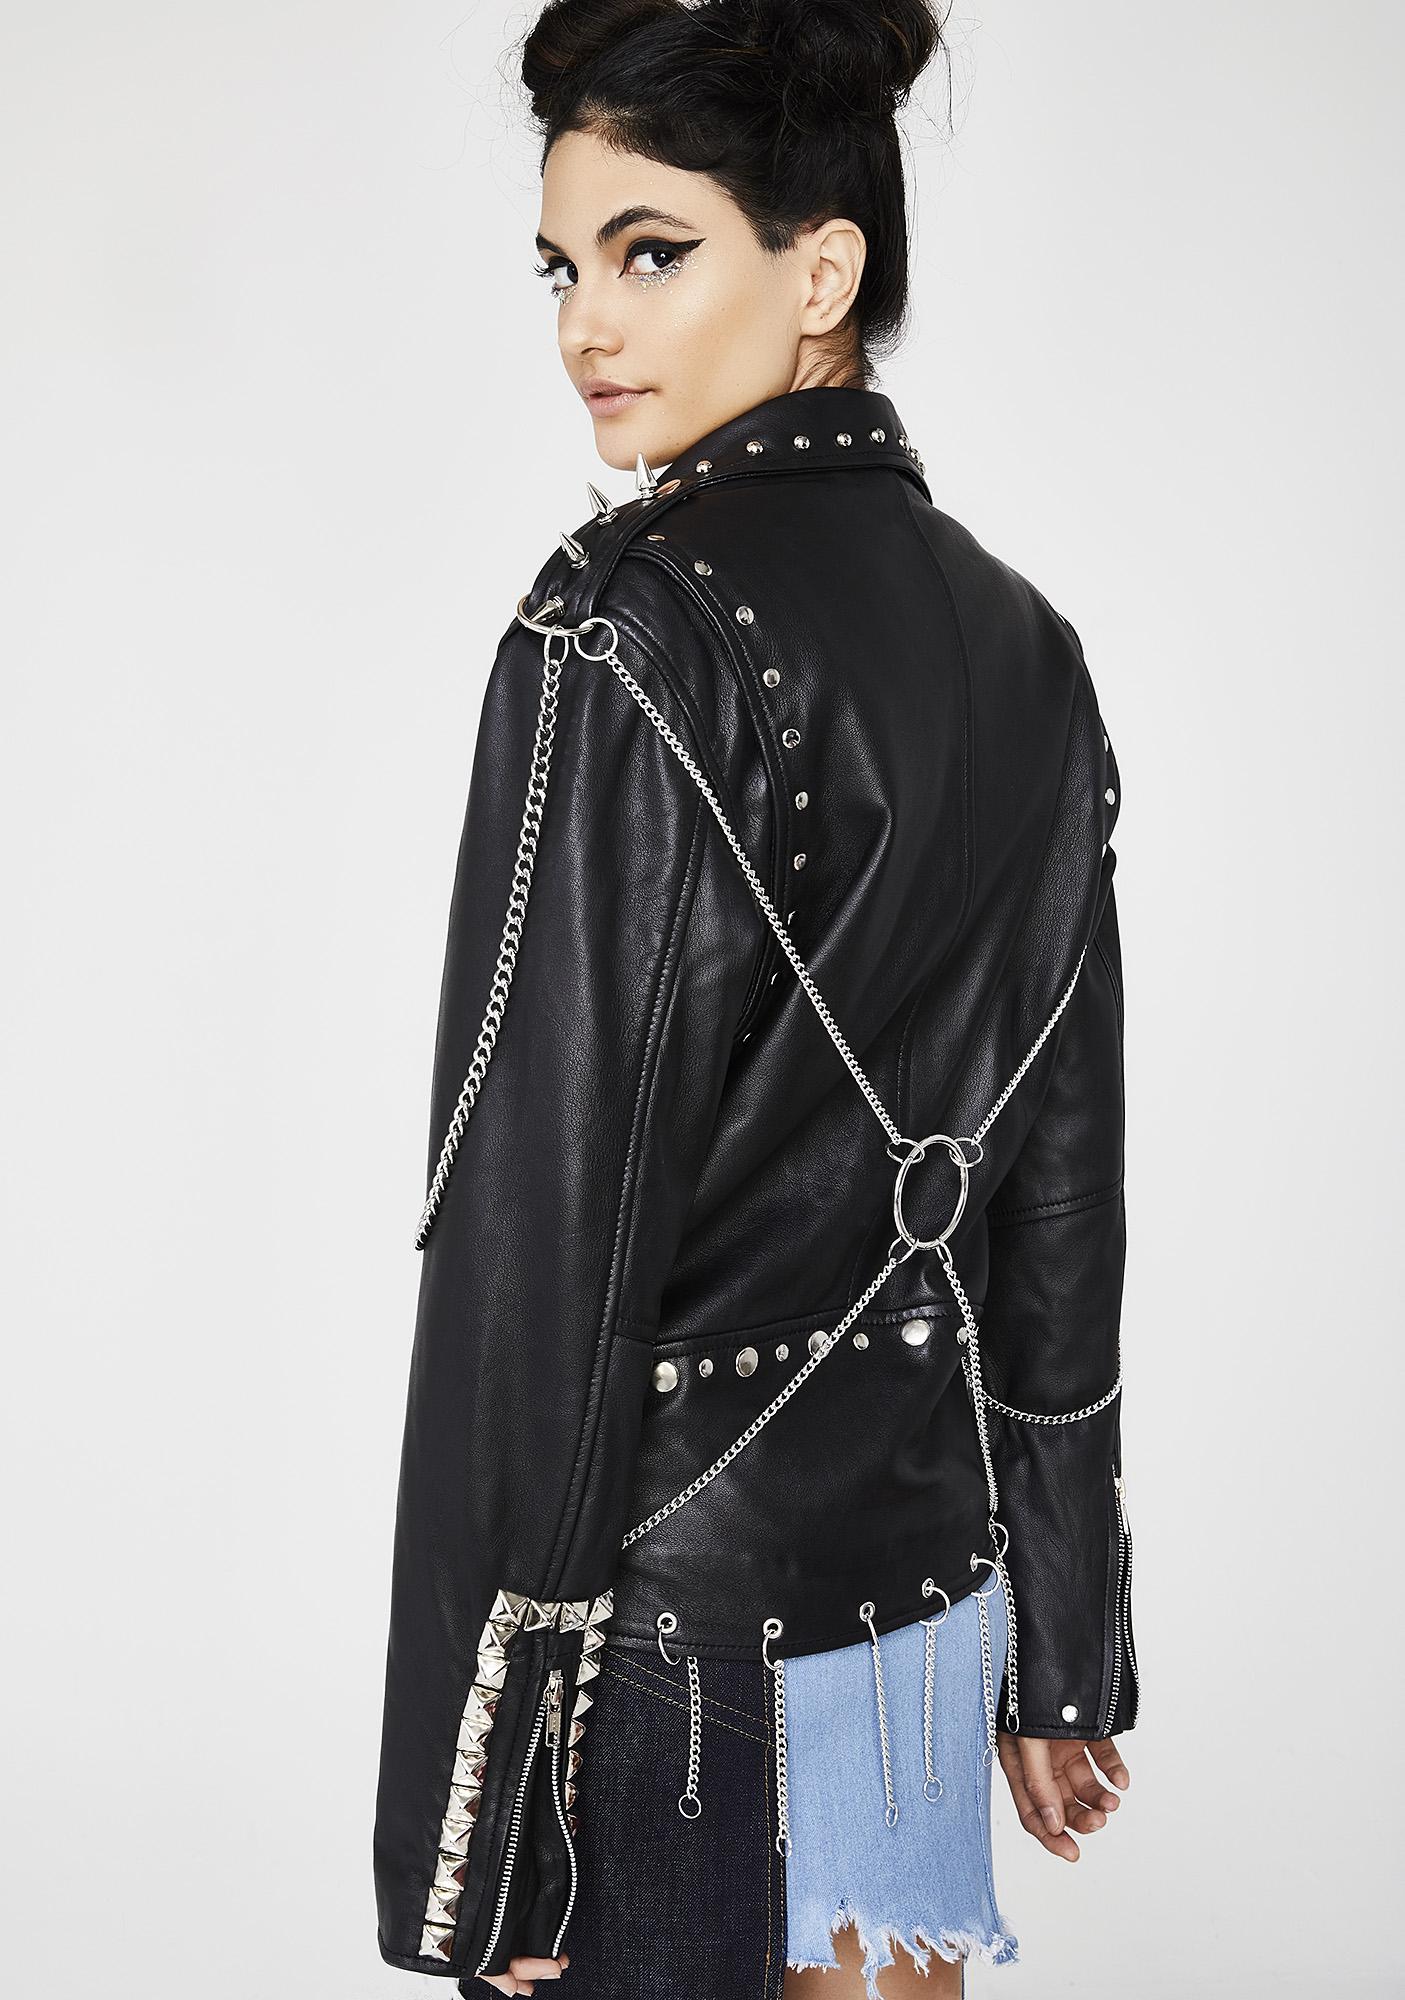 Women Black Genuine Leather Jacket Long Spiked Silver Studded & Chains ...